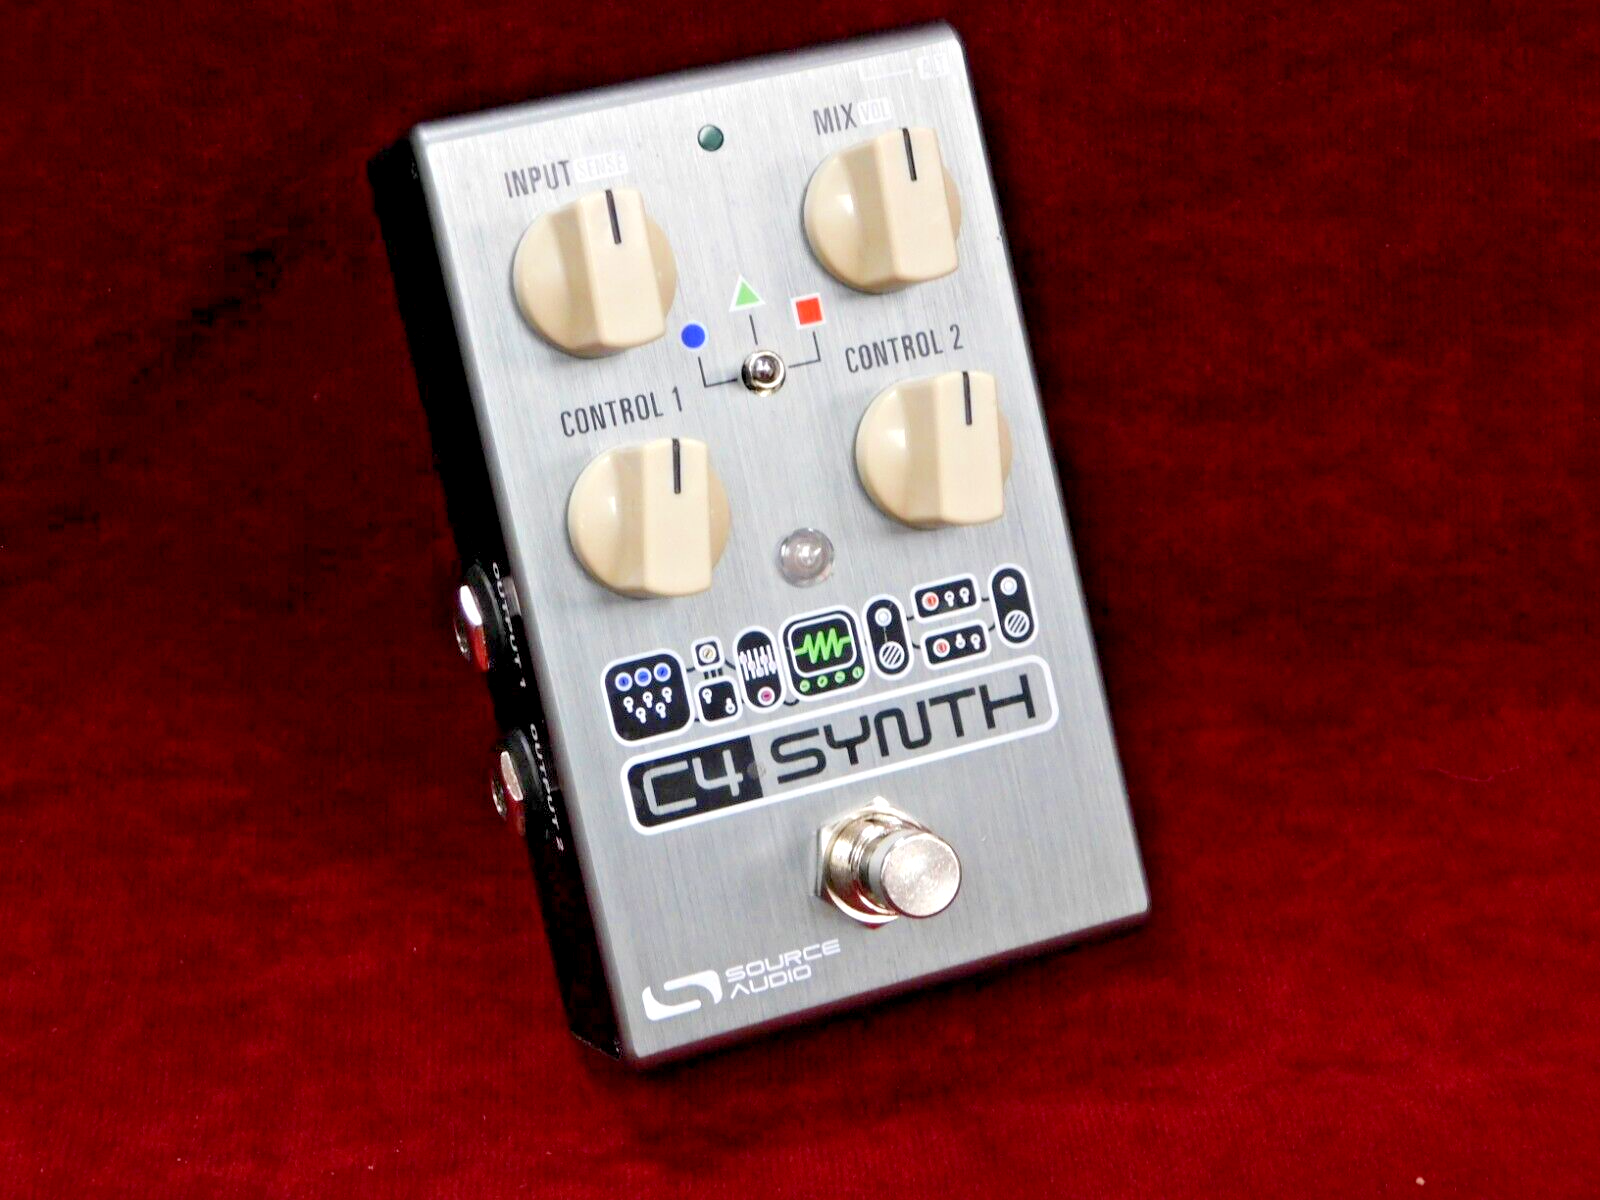 Used Source Audio C4 Synth Pedal! - Sweetwater's Gear Exchange